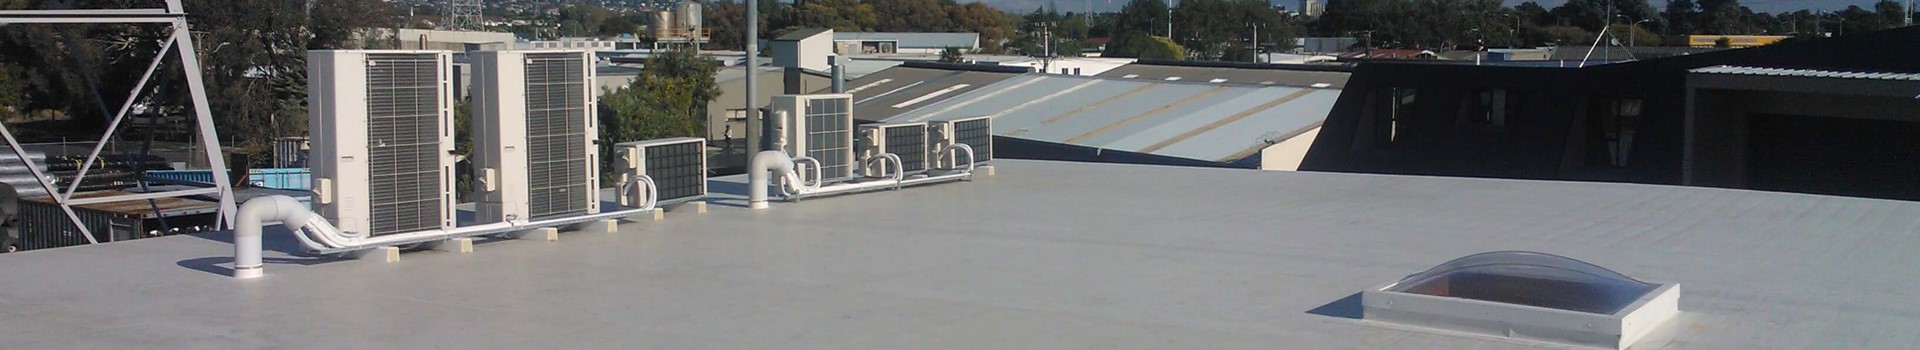 Membrane Overlay Offers a Smart Solution for Minimising Roof Construction Waste